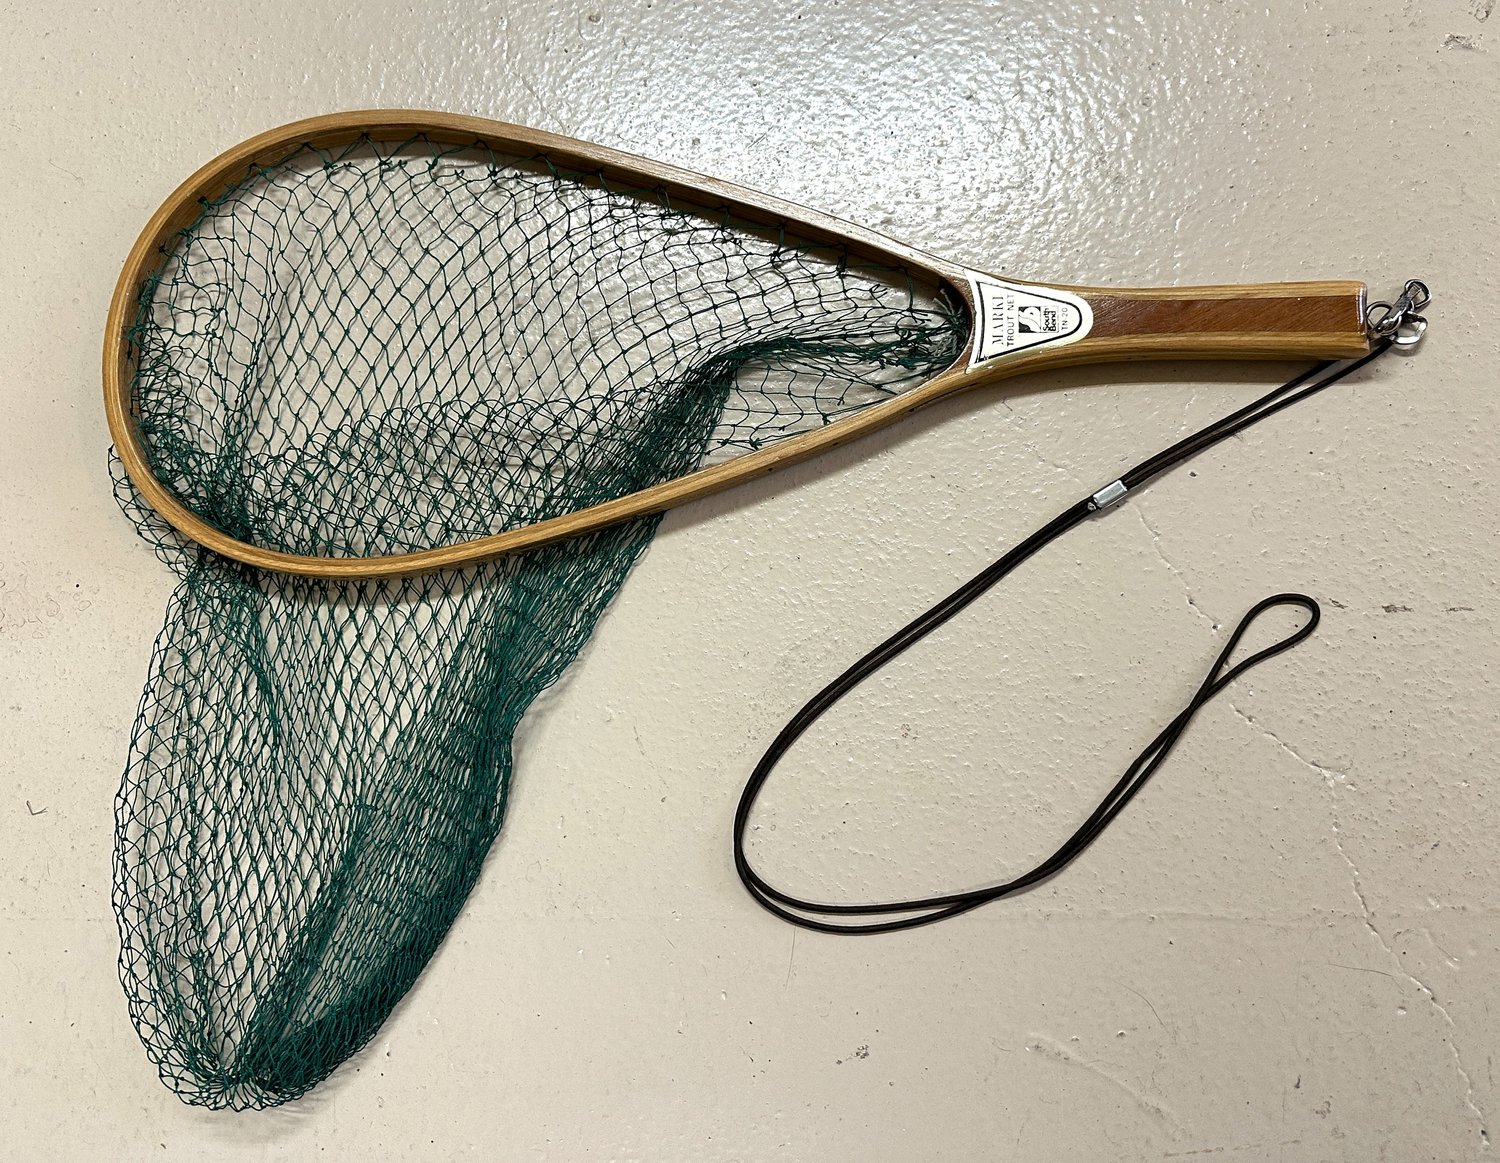 South Bend Mark 1 Trout Net — Vintage Anglers